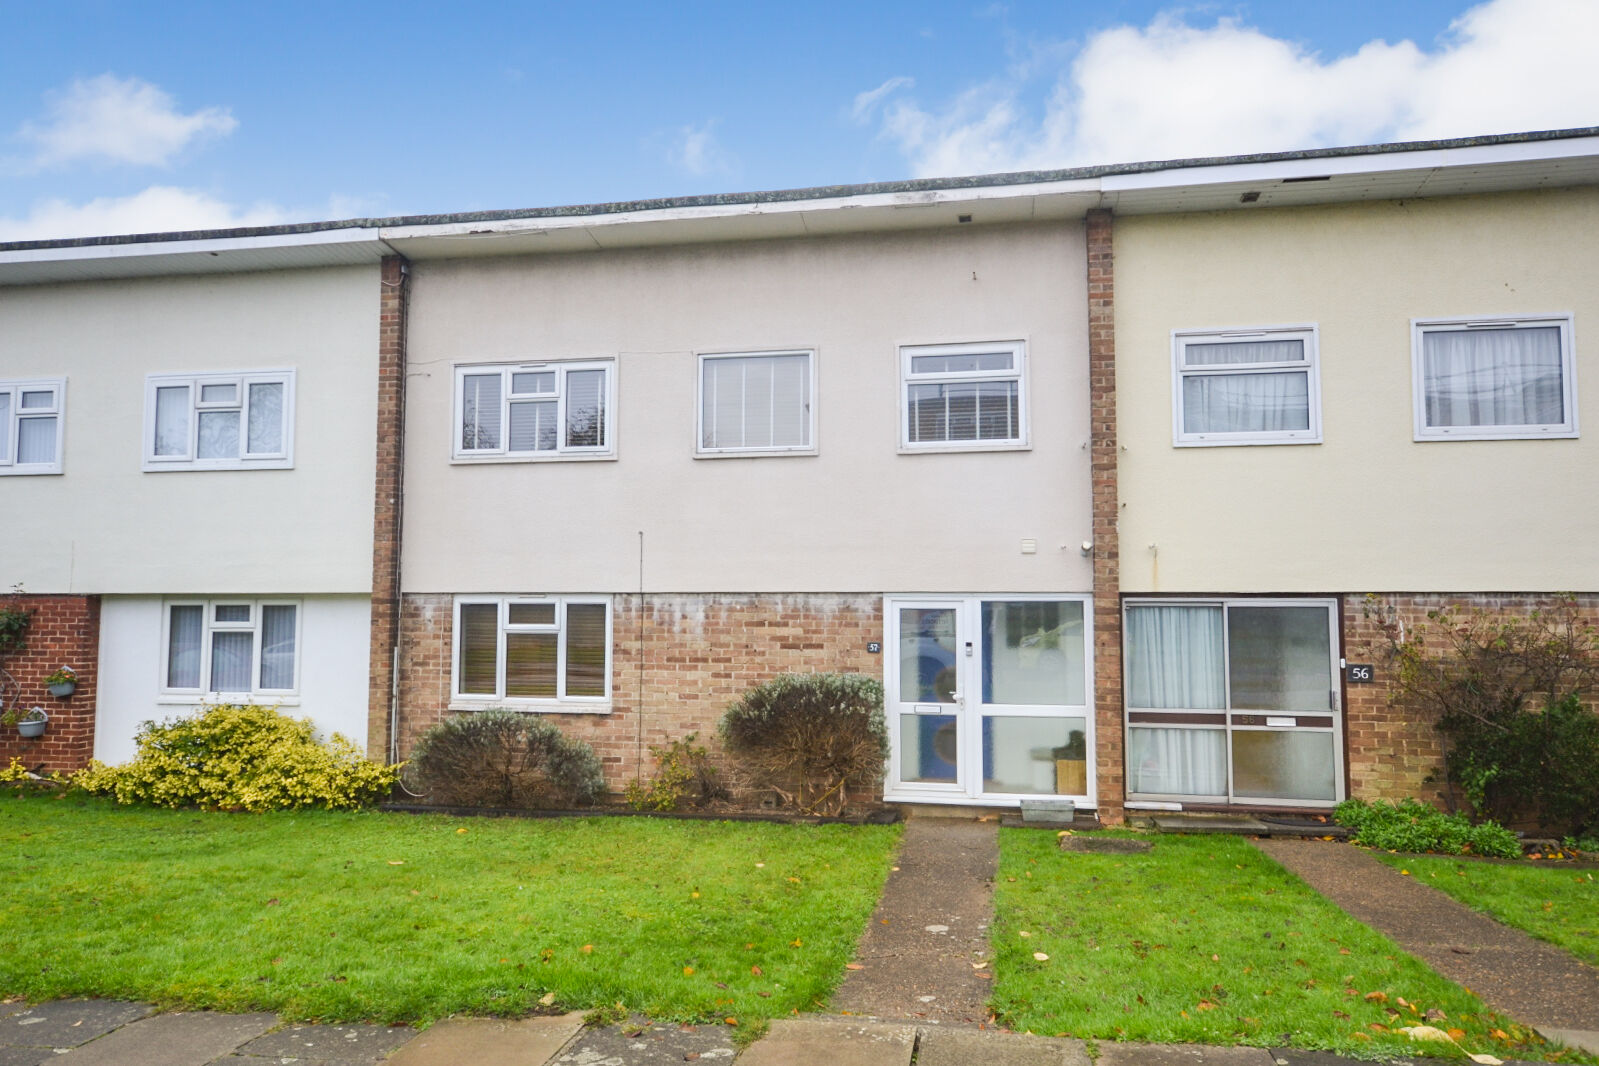 3 bedroom mid terraced house for sale The Chantry, Harlow, CM20, main image